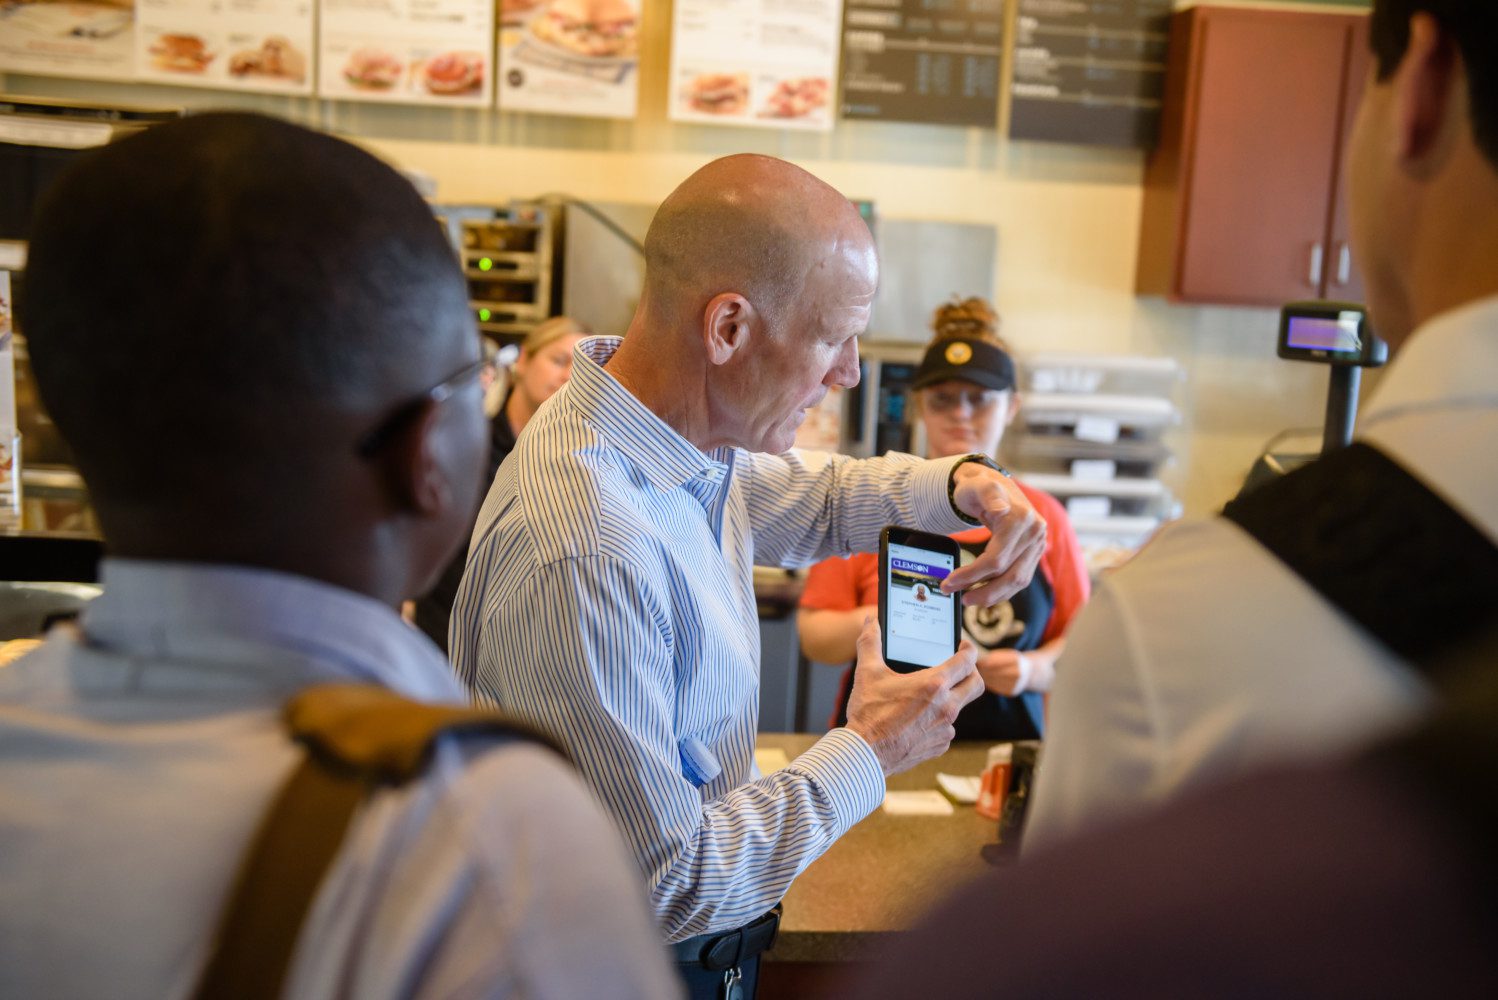 Steve Robbins of TigerOne Card Services demonstrates a transaction using mobile ID at a retail dining location in Hendrix Student Center.